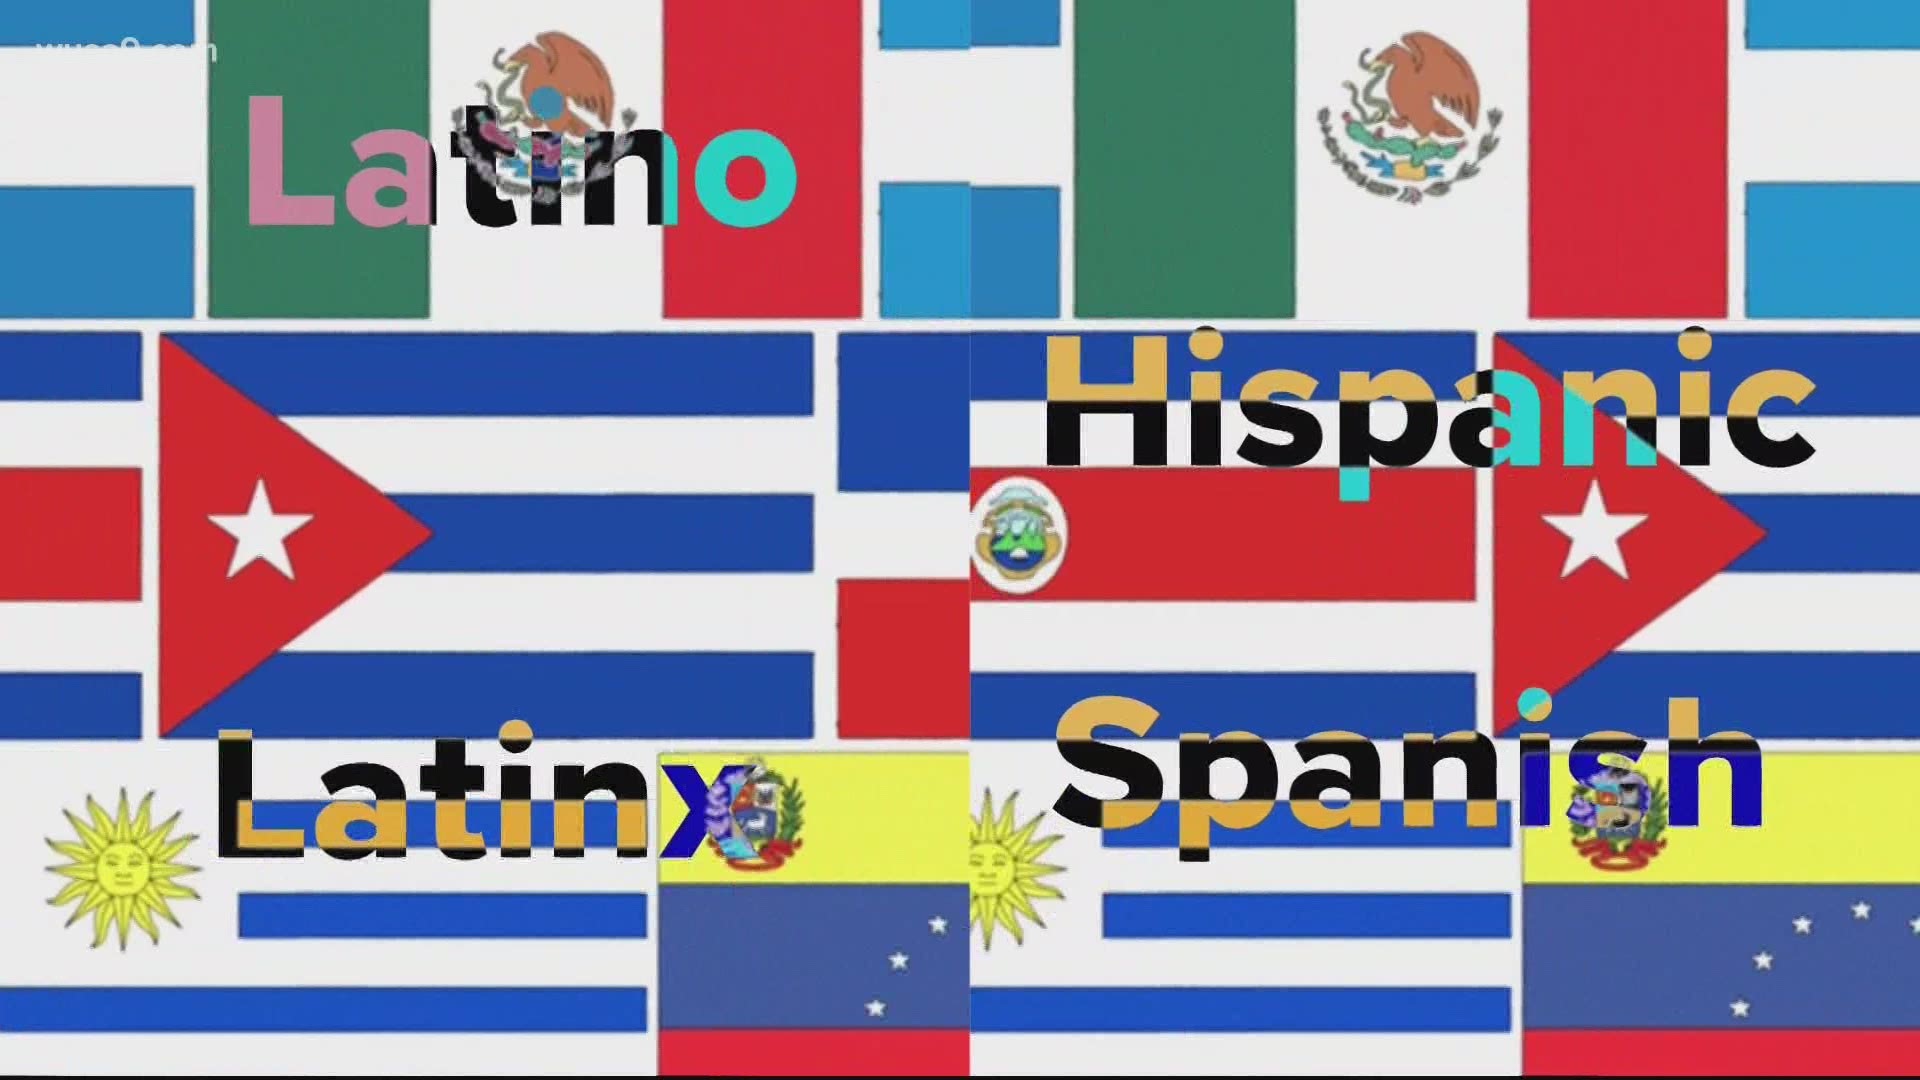 In honor of Hispanic Heritage Month Ariane breaksdown the meaning behind some of the terminology in the Hispanic community